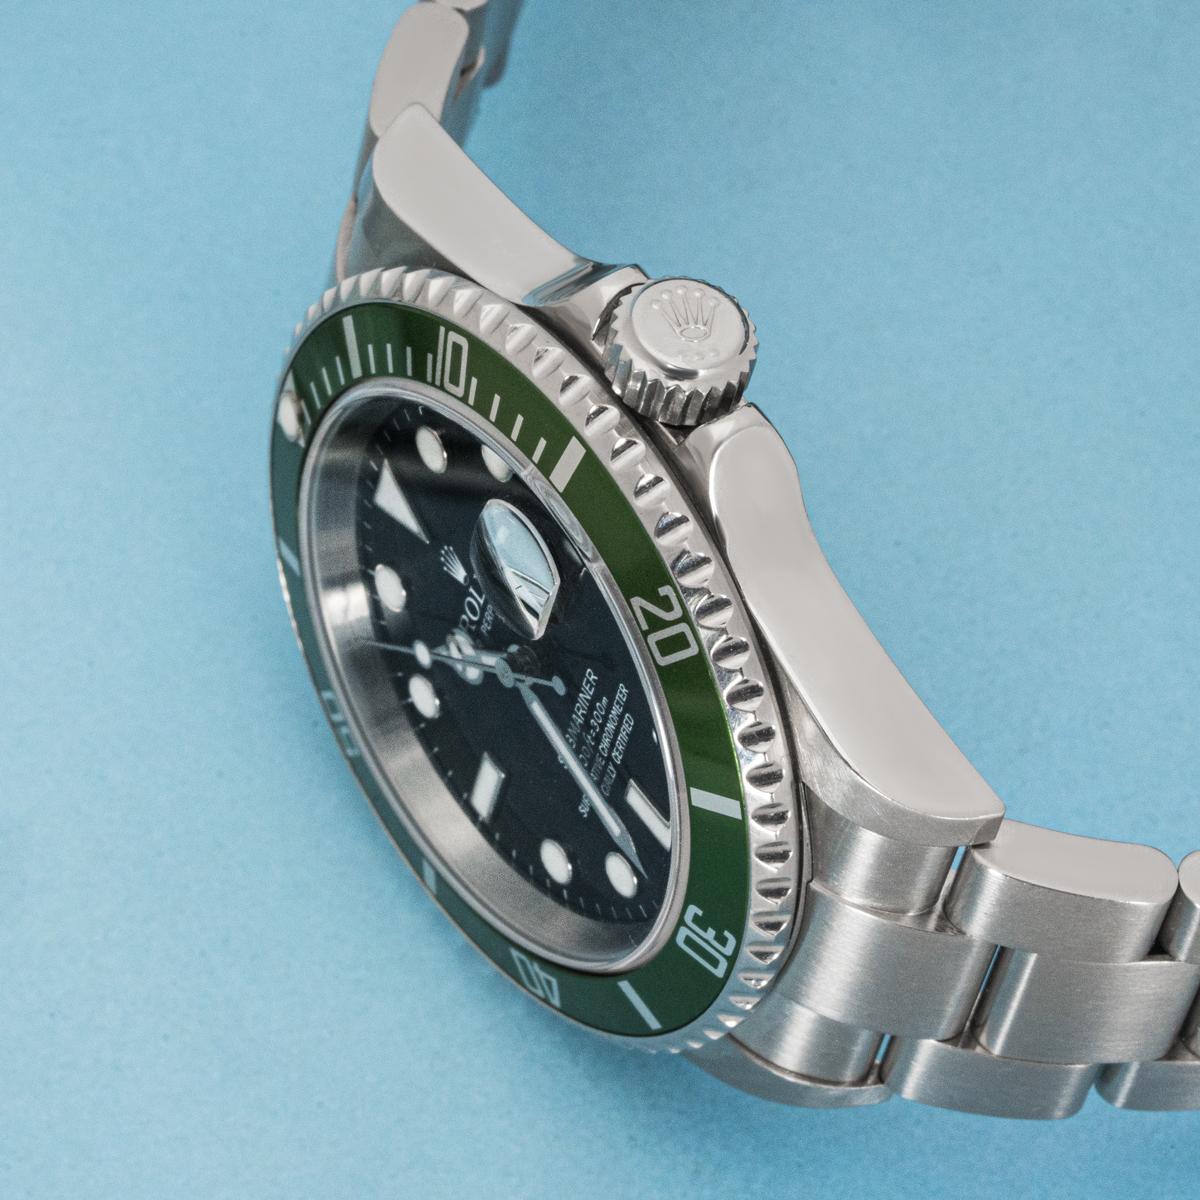 Rolex Submariner Kermit 16610LV In Excellent Condition For Sale In London, GB